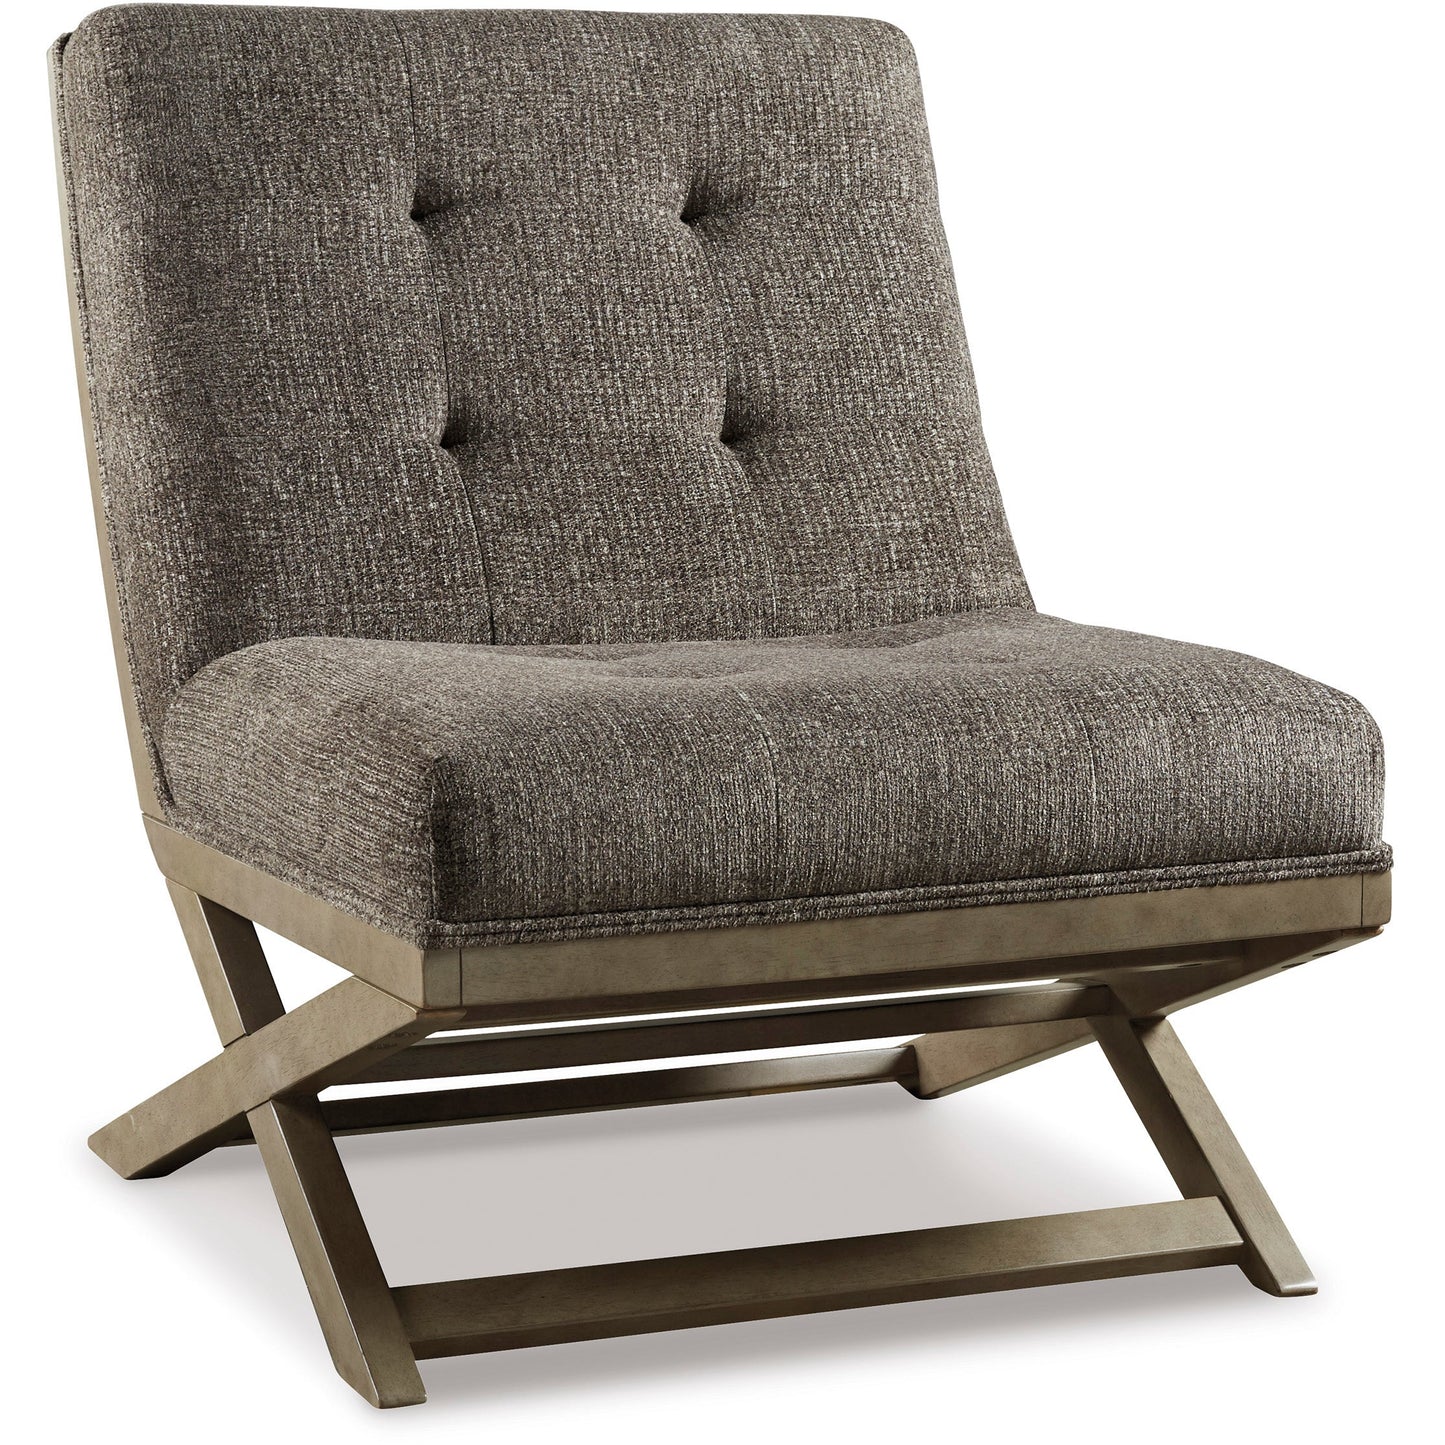 SIDEWINDER ACCENT CHAIR - TAUPE